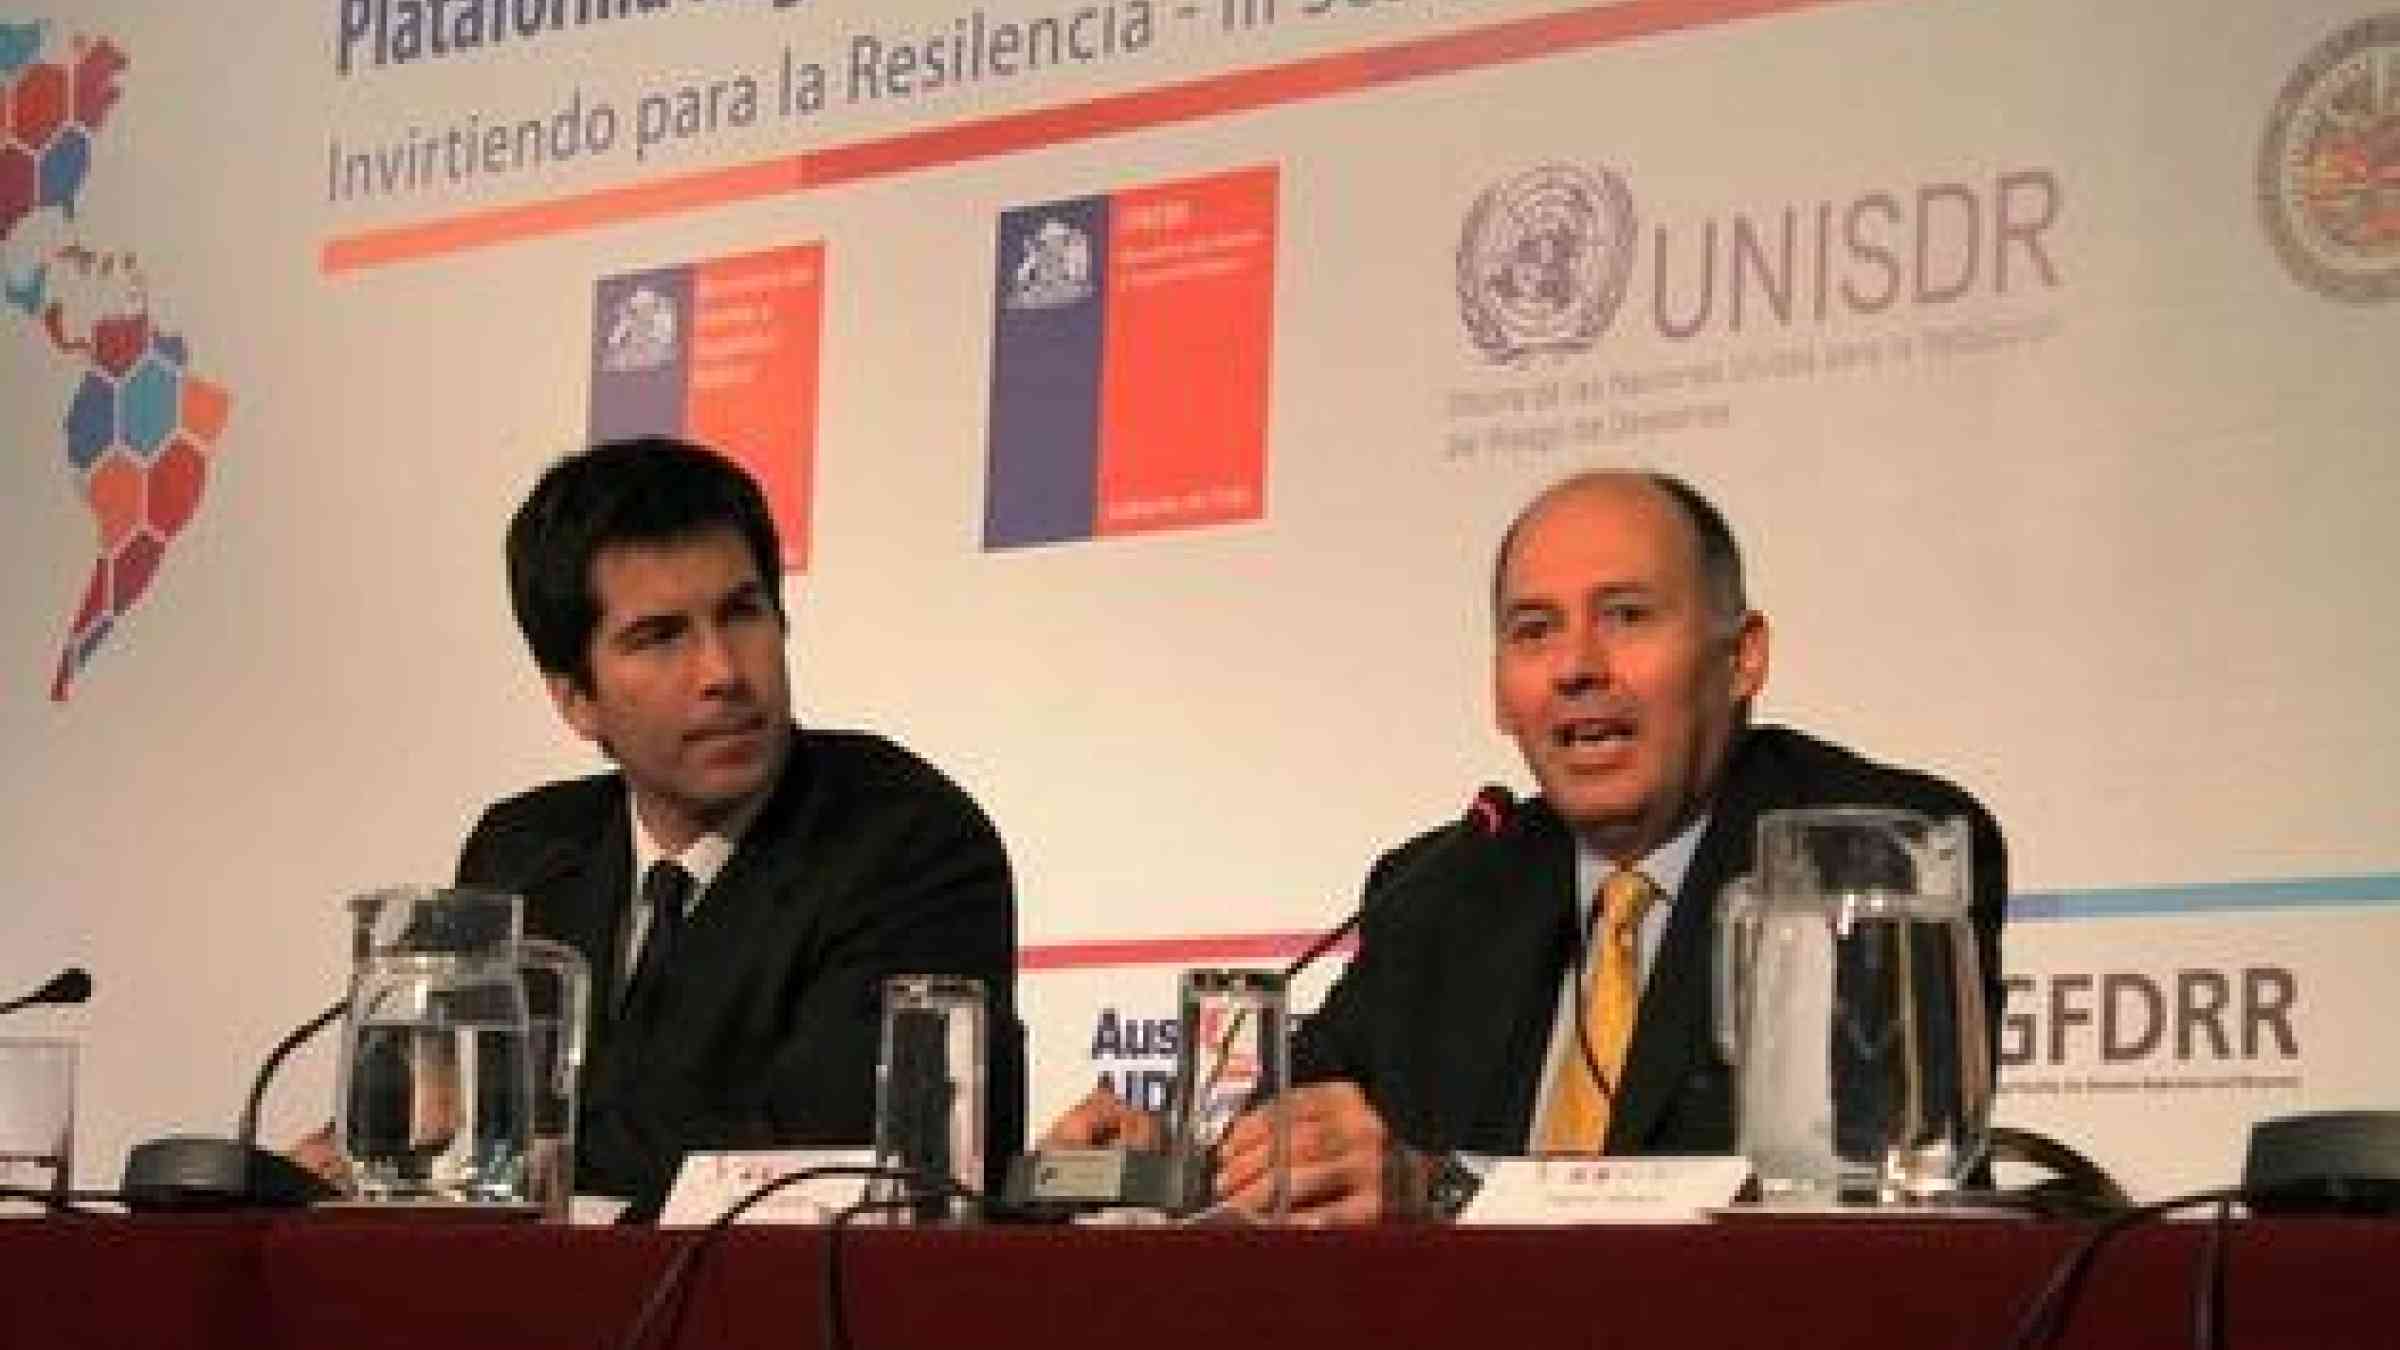 From left: Director of Chile's National Emergency Office of Ministry of the Interior and Public Security Benjamin Chacana and Head of UNISDR's Regional Office in the Americas Ricardo Mena at the closing of the 3rd Session of the Regional Platform for Disaster Risk Reduction in Santiago, Chile.